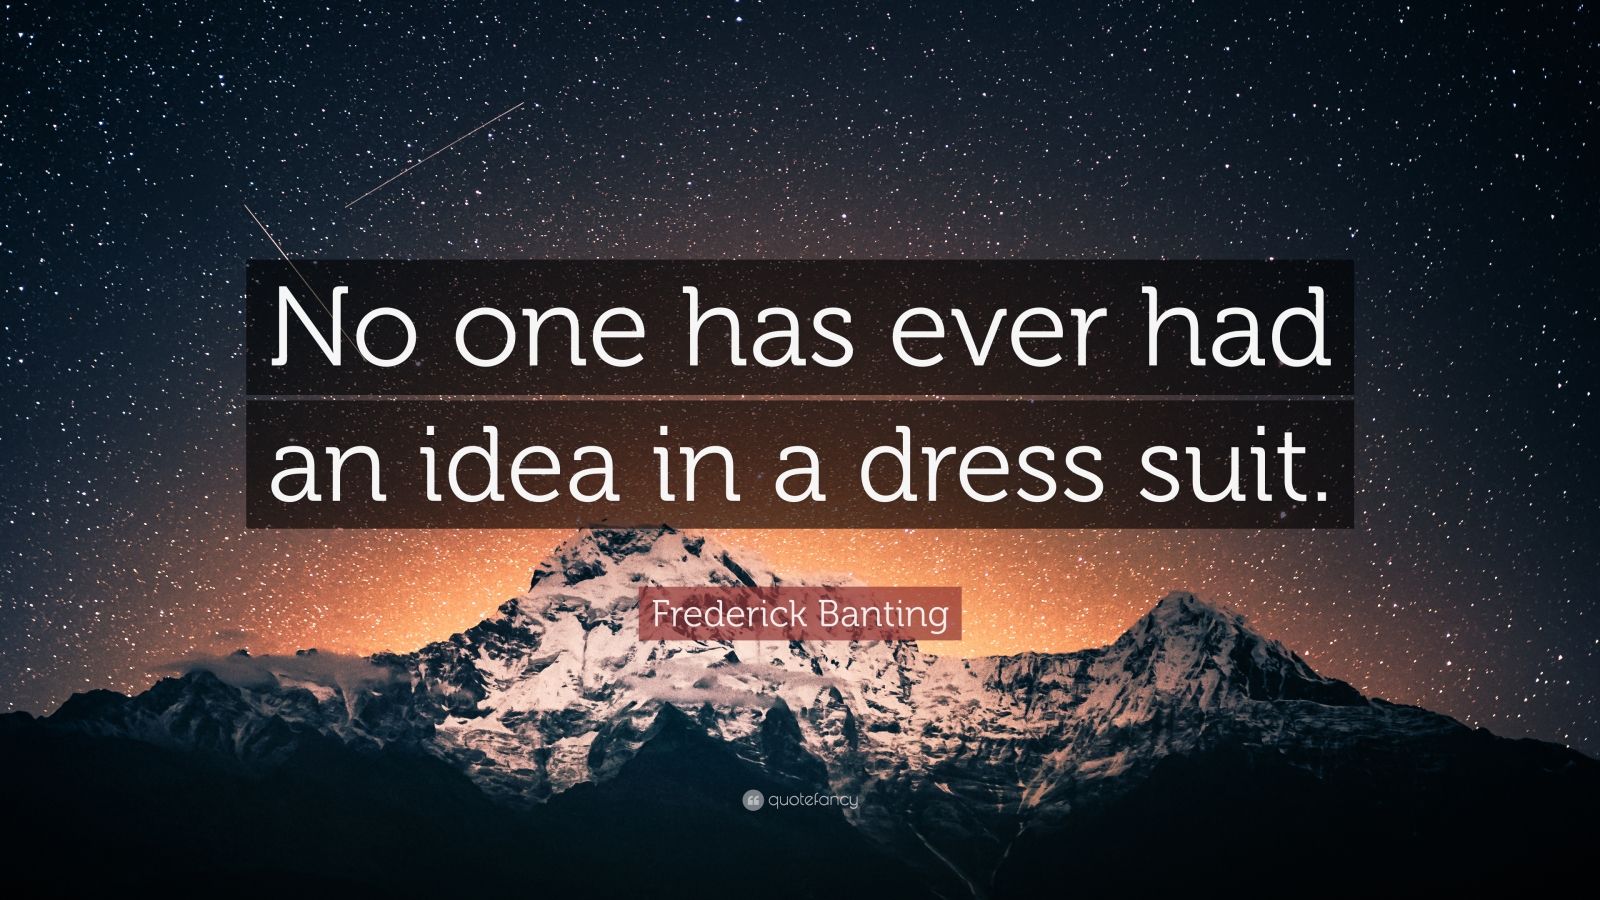 Frederick Banting Quote: “No one has ever had an idea in a dress suit